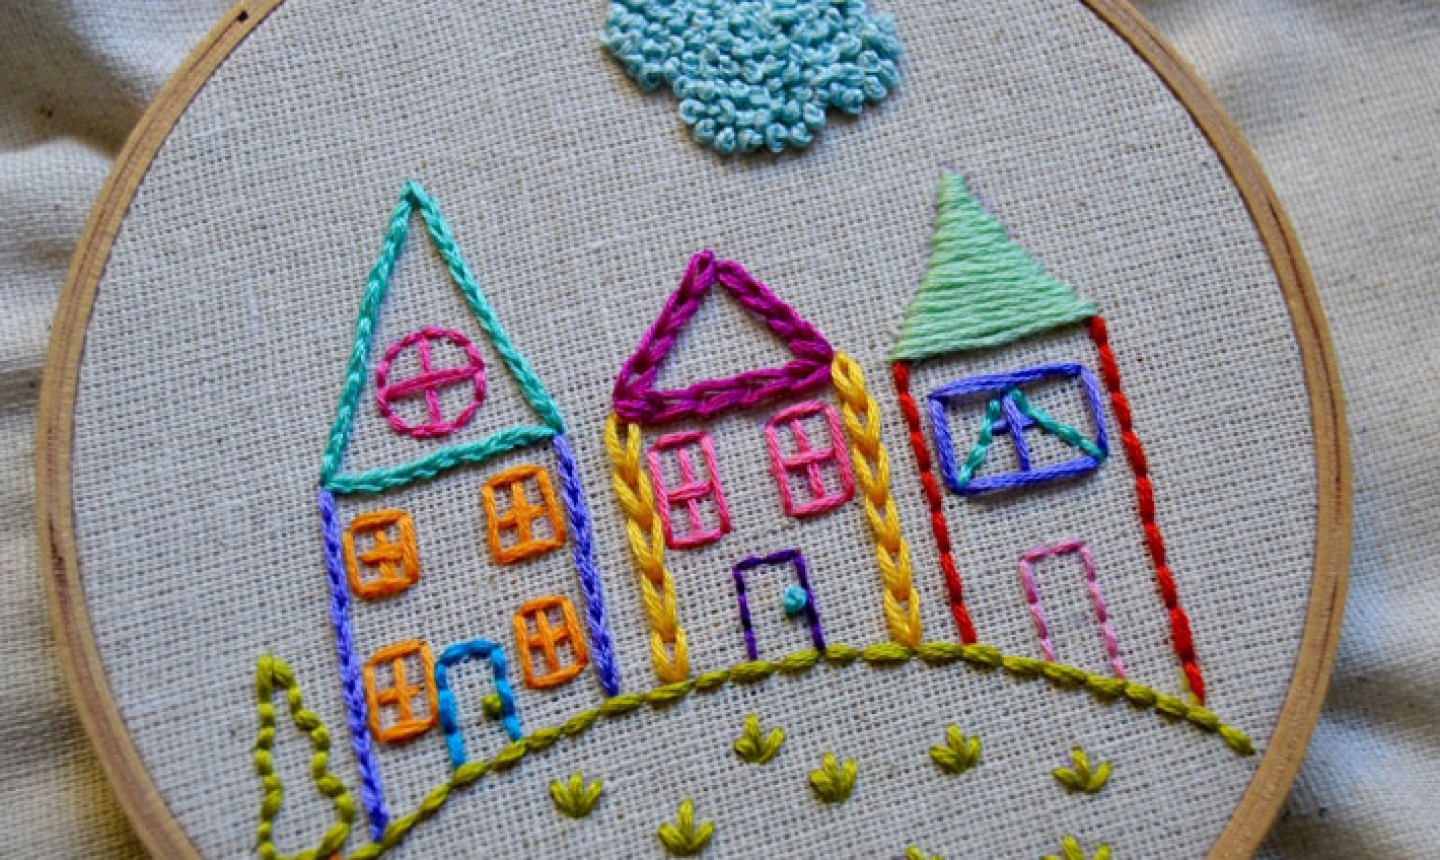 Hand Stitch Embroidery Patterns Free Embroidered House Neighborhood Tutorial